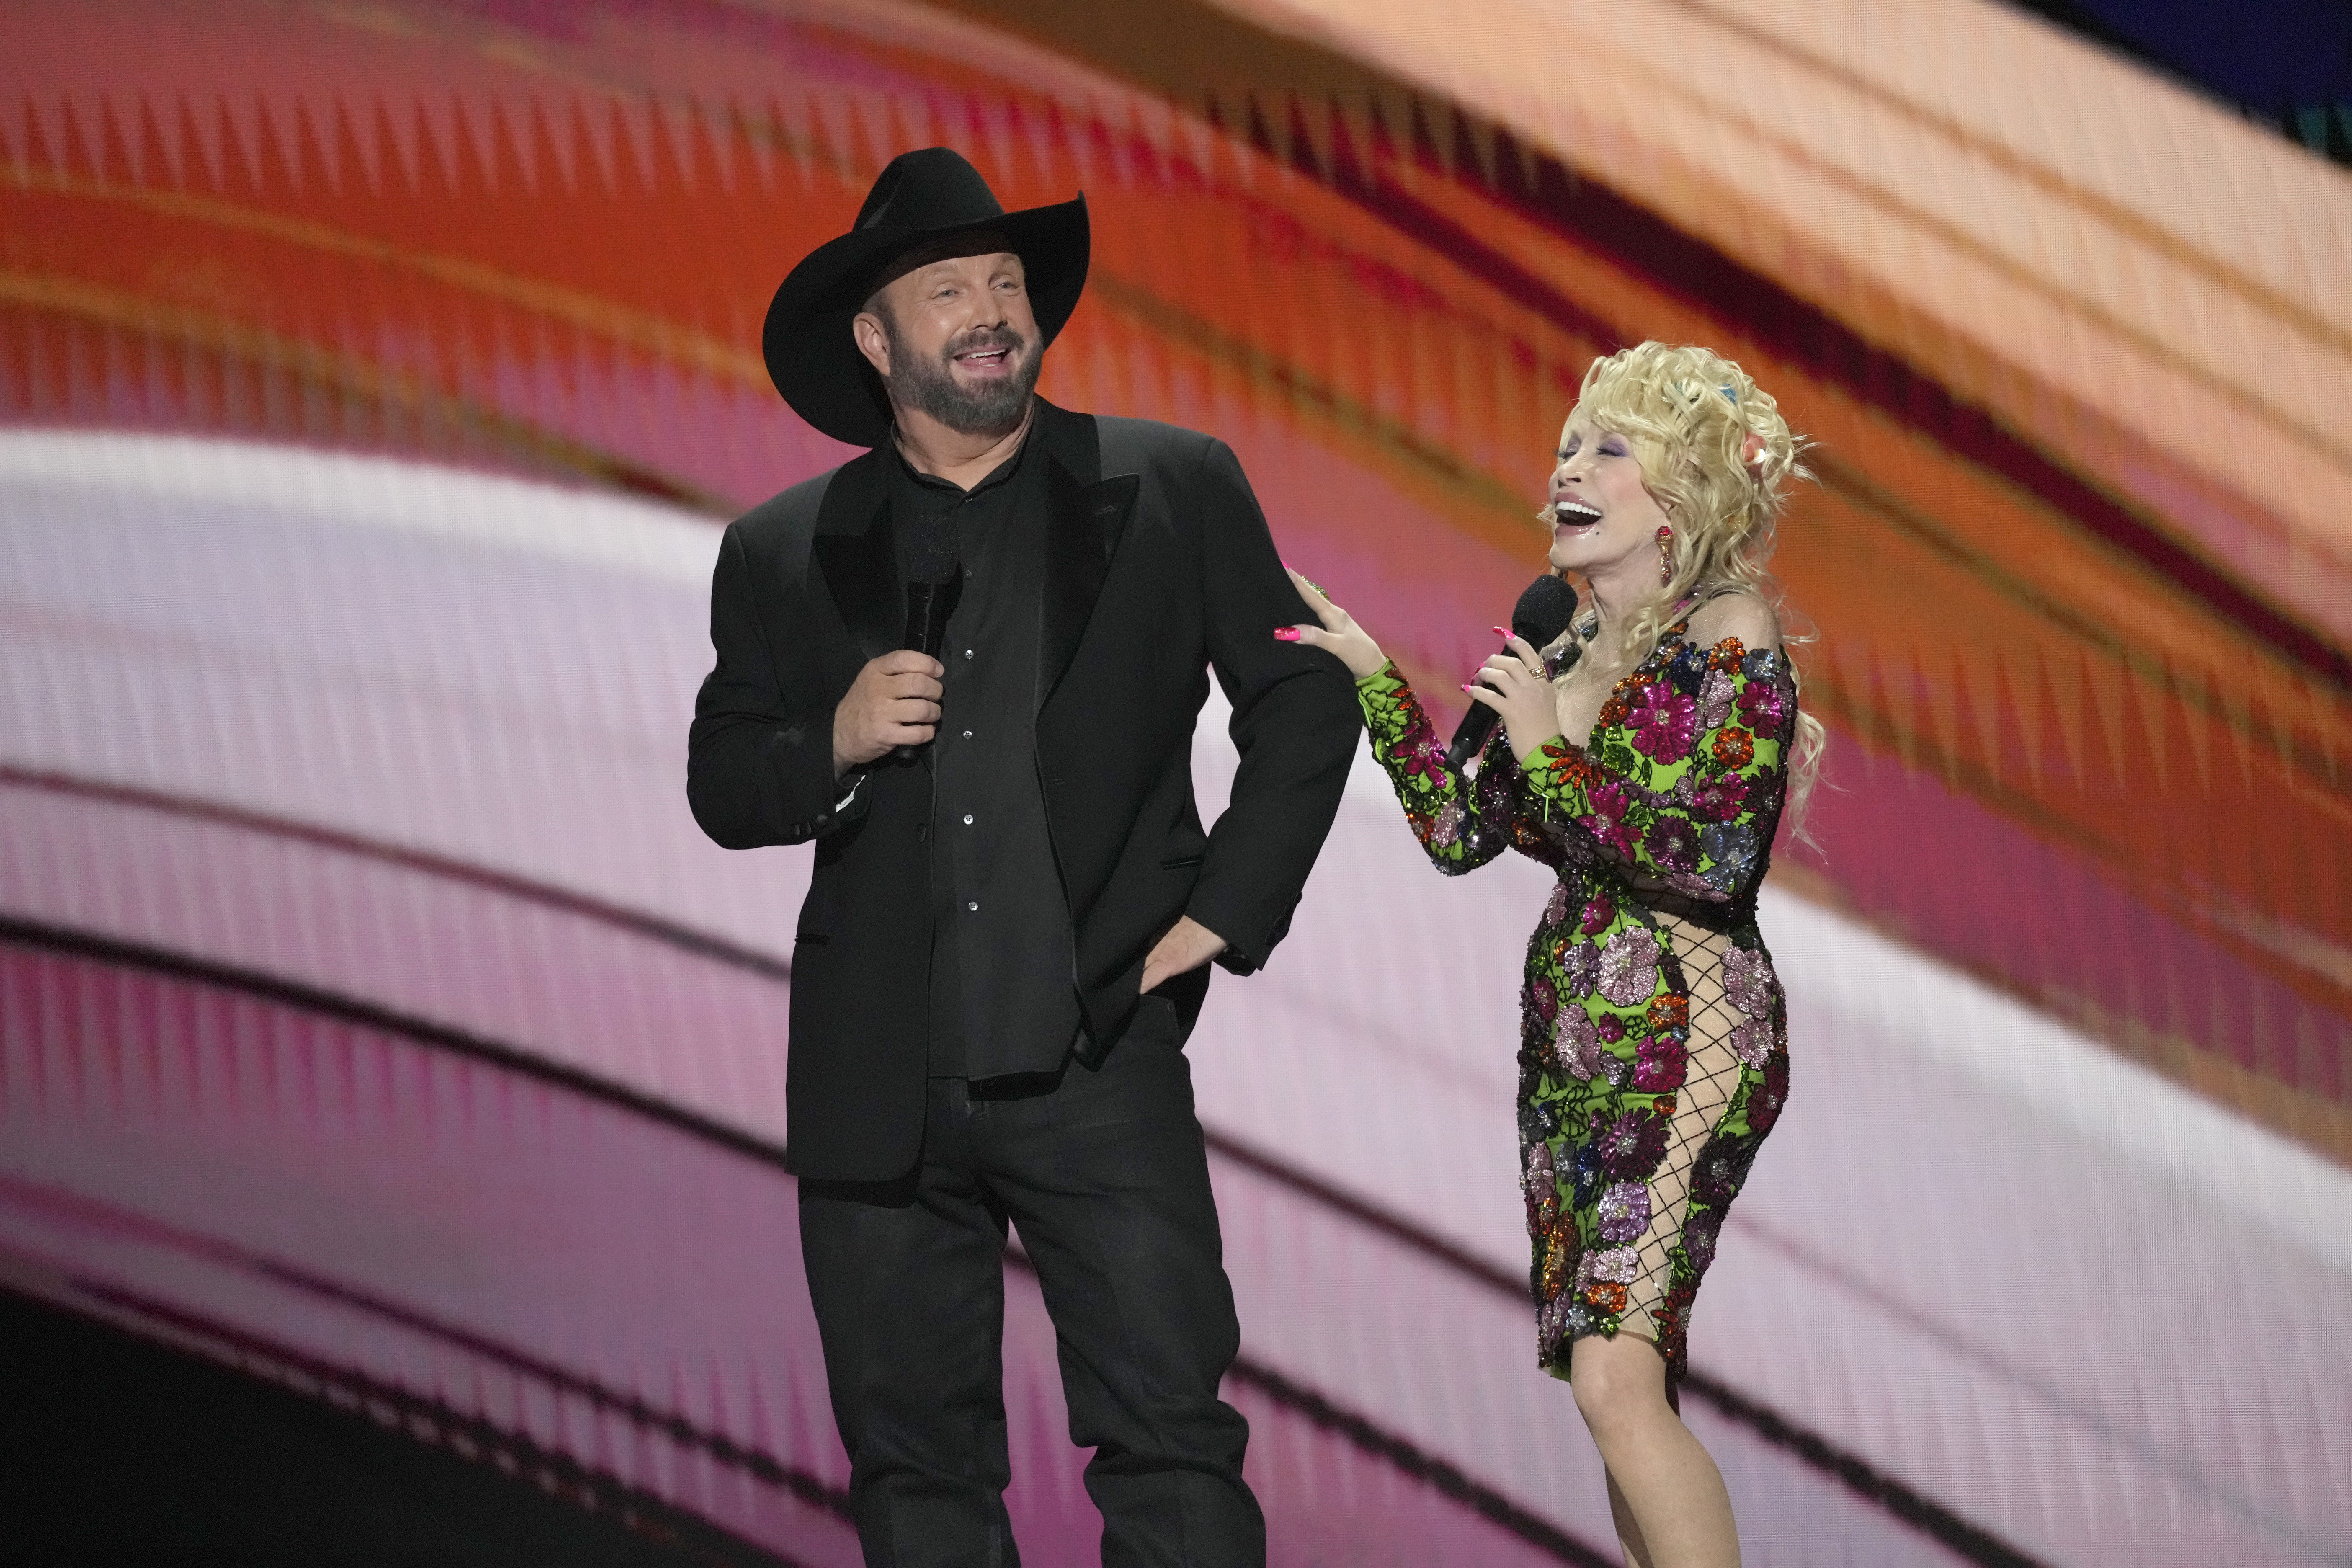 Hosts Garth Brooks, left, and Dolly Parton speak at the 58th annual Academy of Country Music Awards